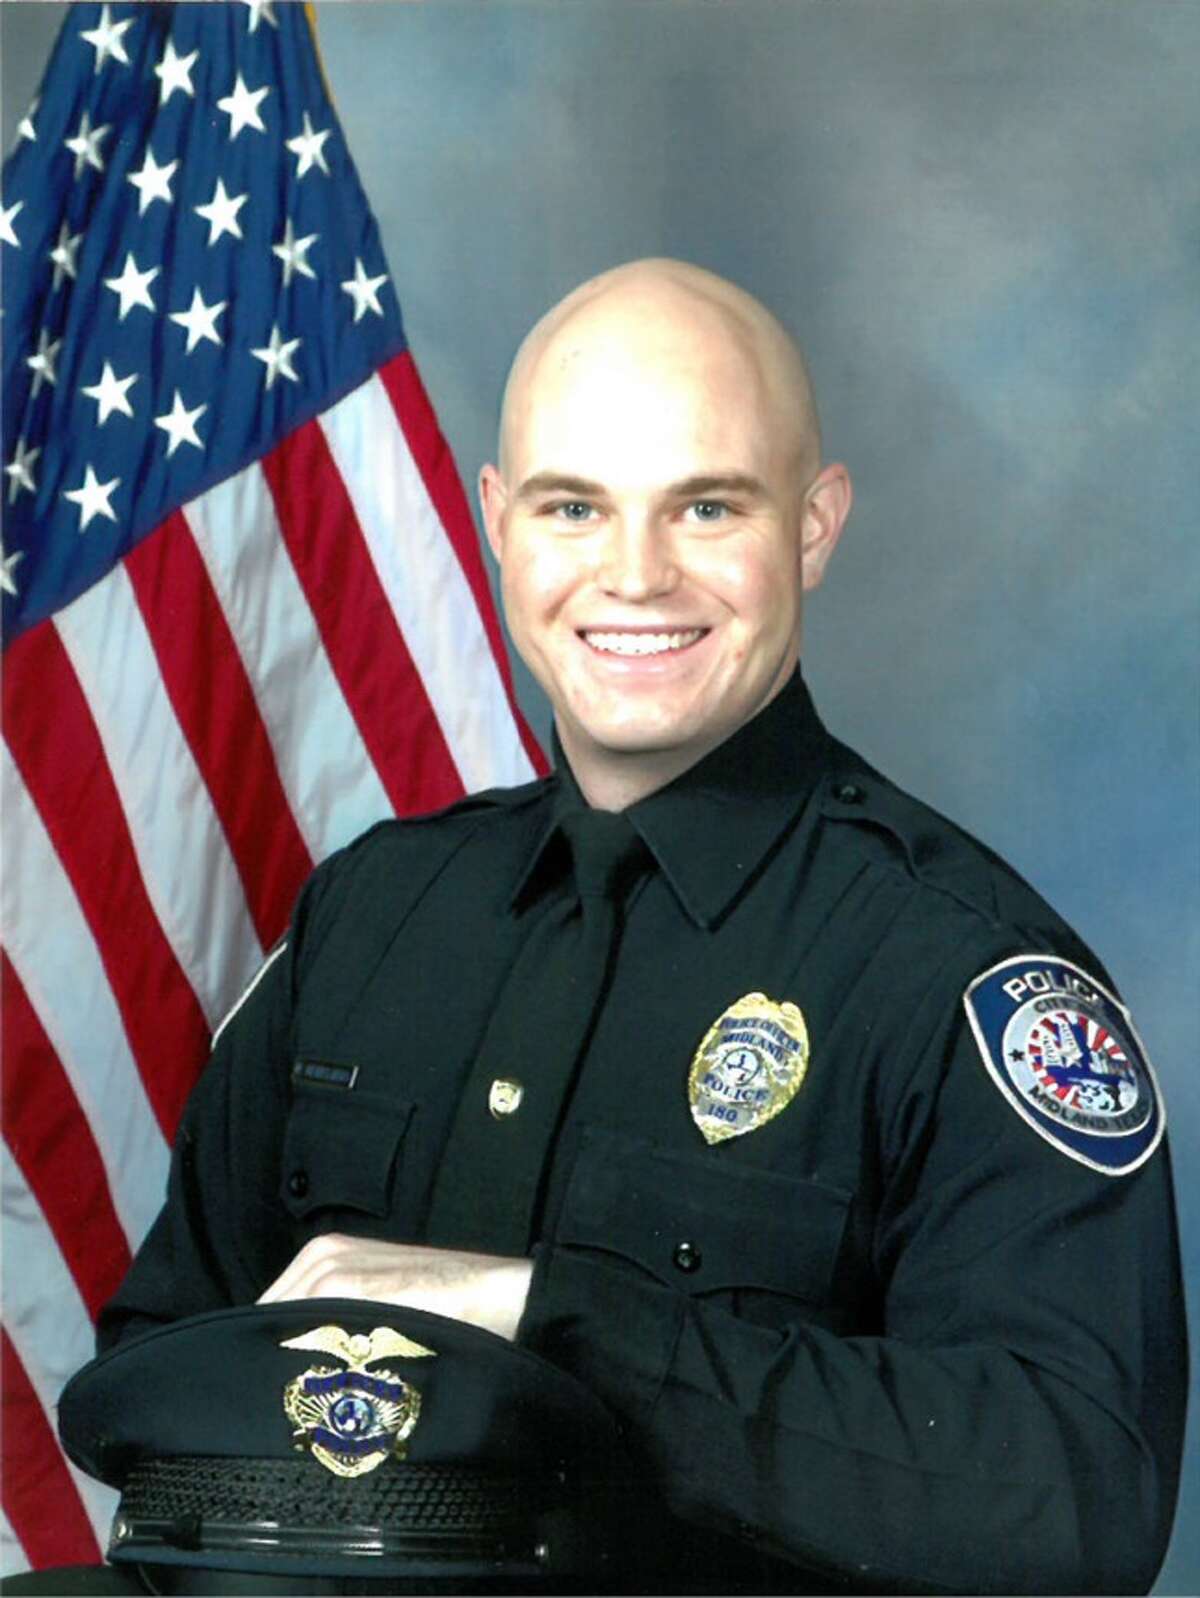 Midland Police Department Officer Nathan Heidelberg died March 5, 2019, after being shot while responding to an alarm at a local residence, according to the city’s spokesman.